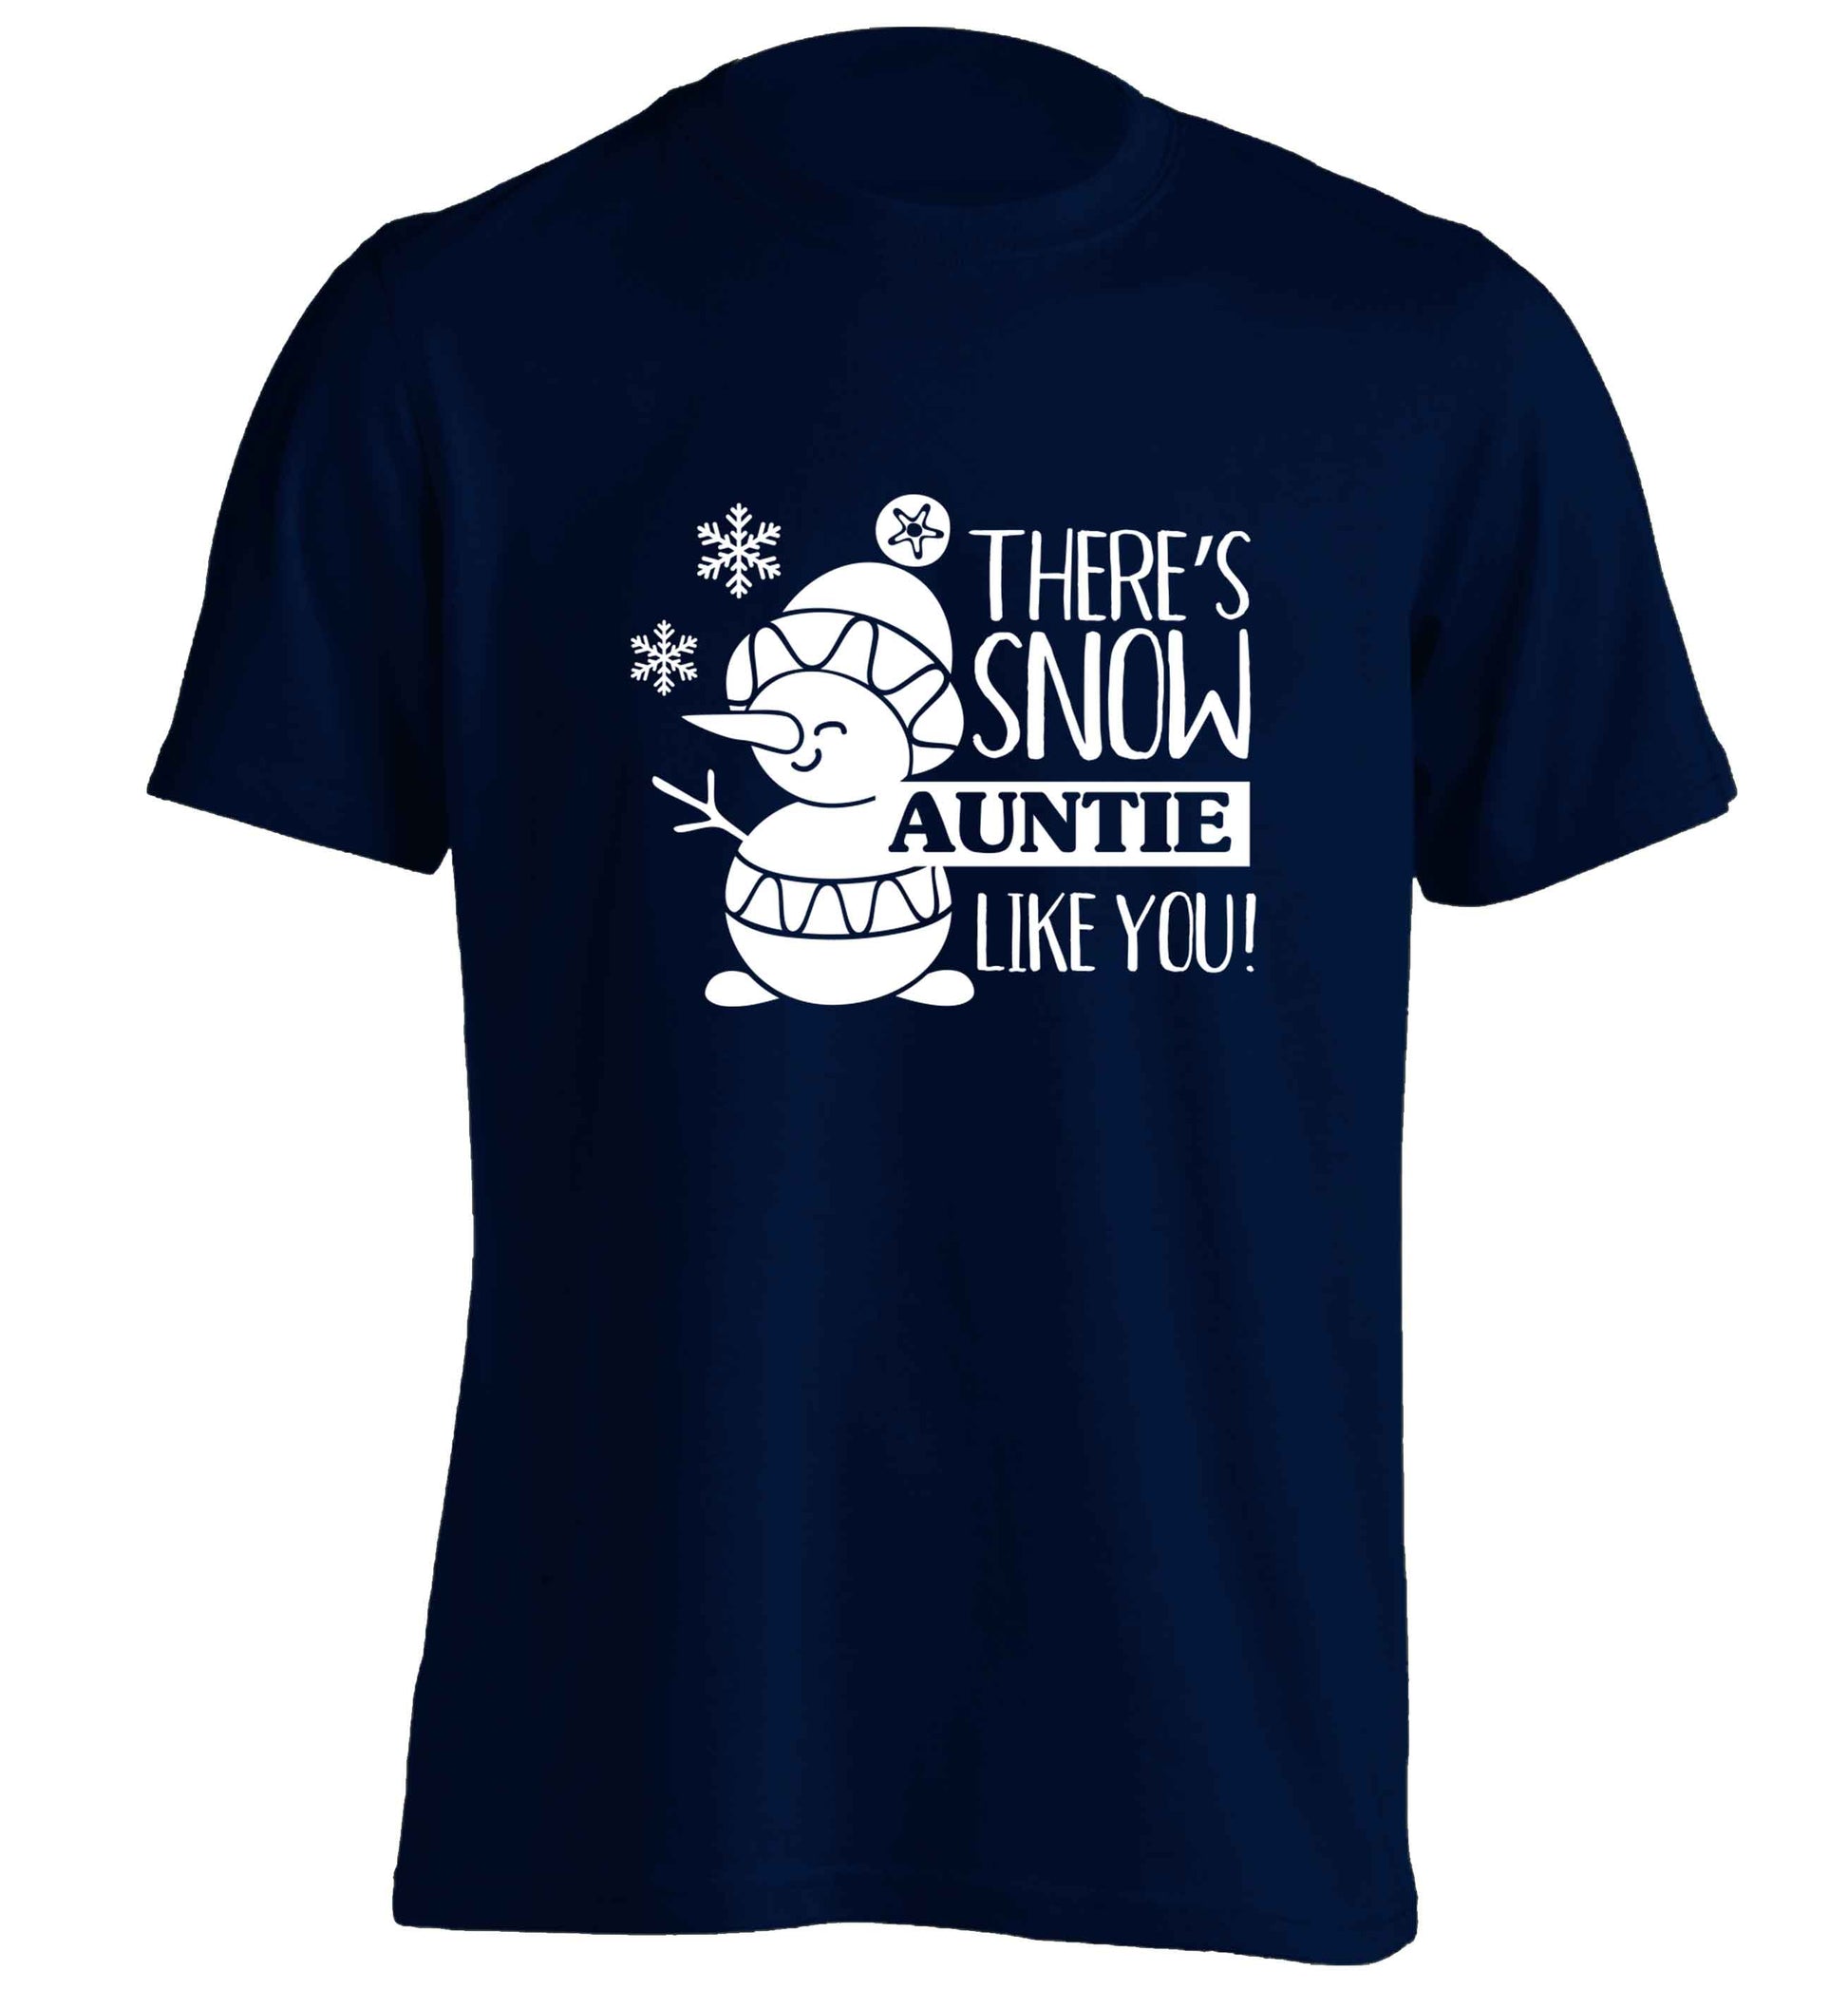 There's snow auntie like you adults unisex navy Tshirt 2XL